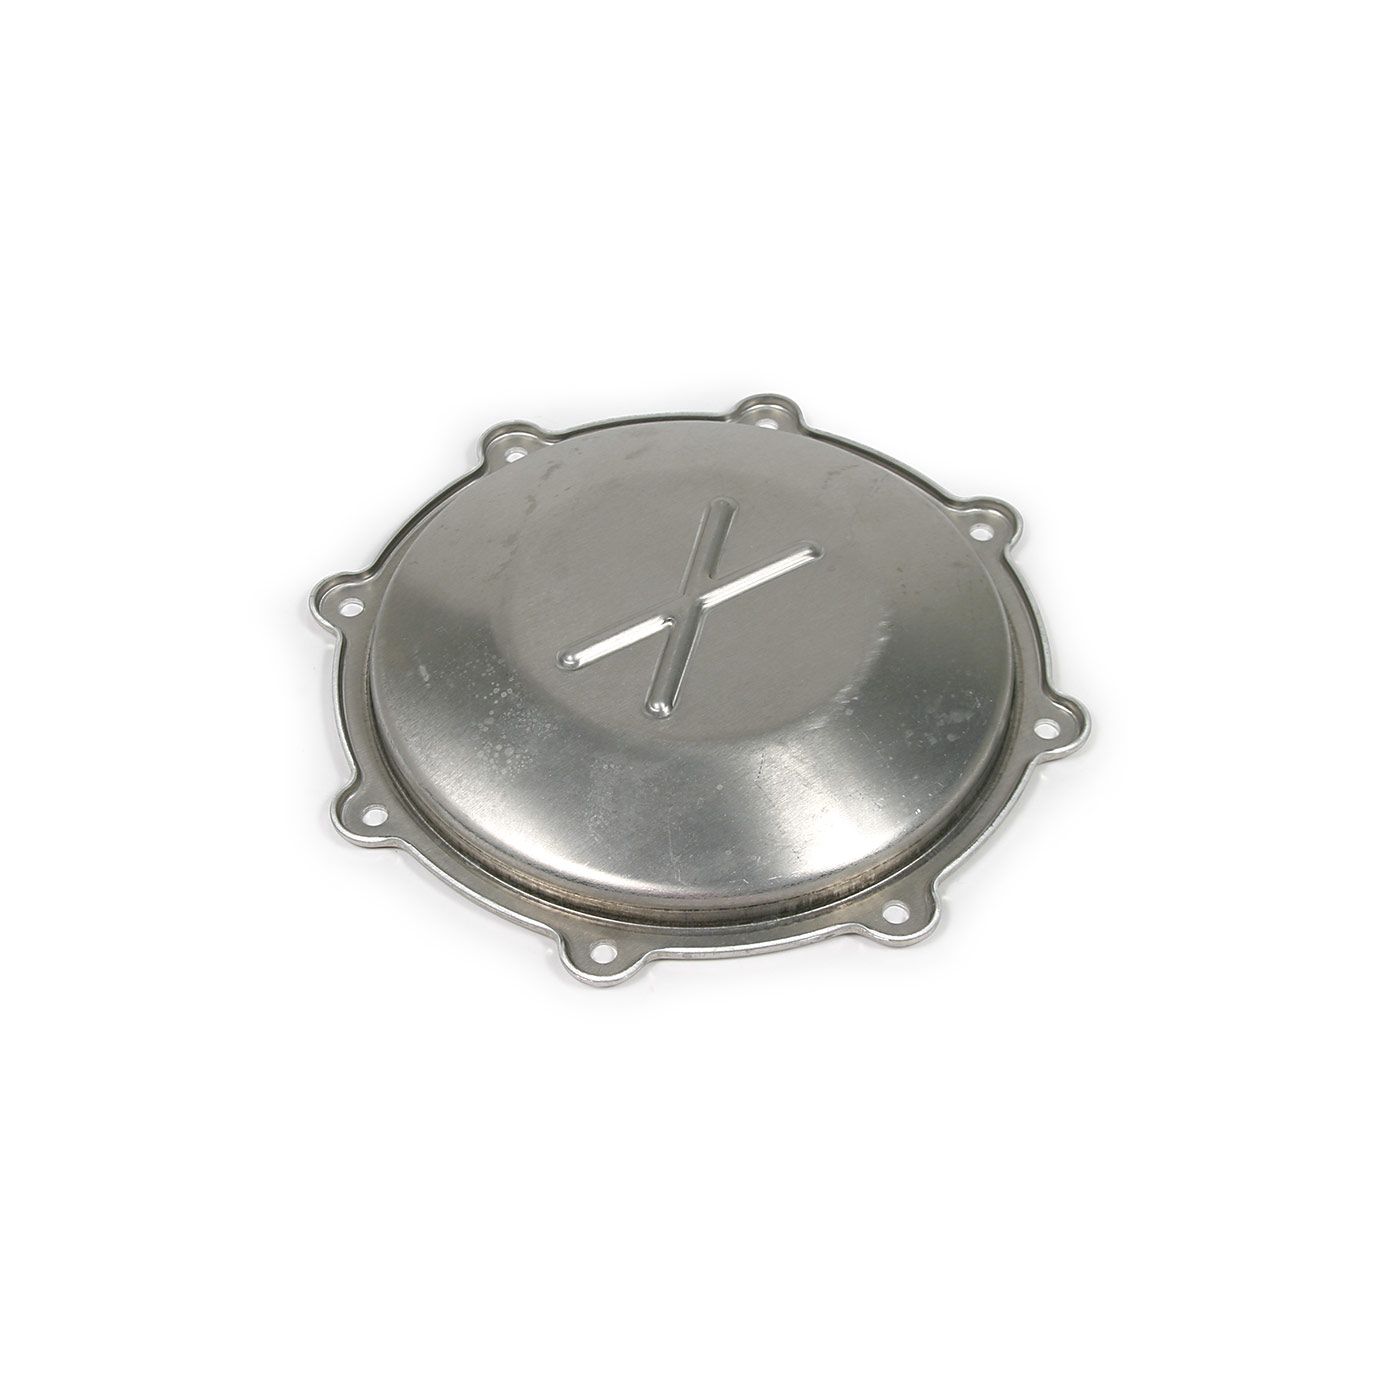 C5 and C6 Corvette 97-13 Differential Pinion Cover Plate, New or Refurbished